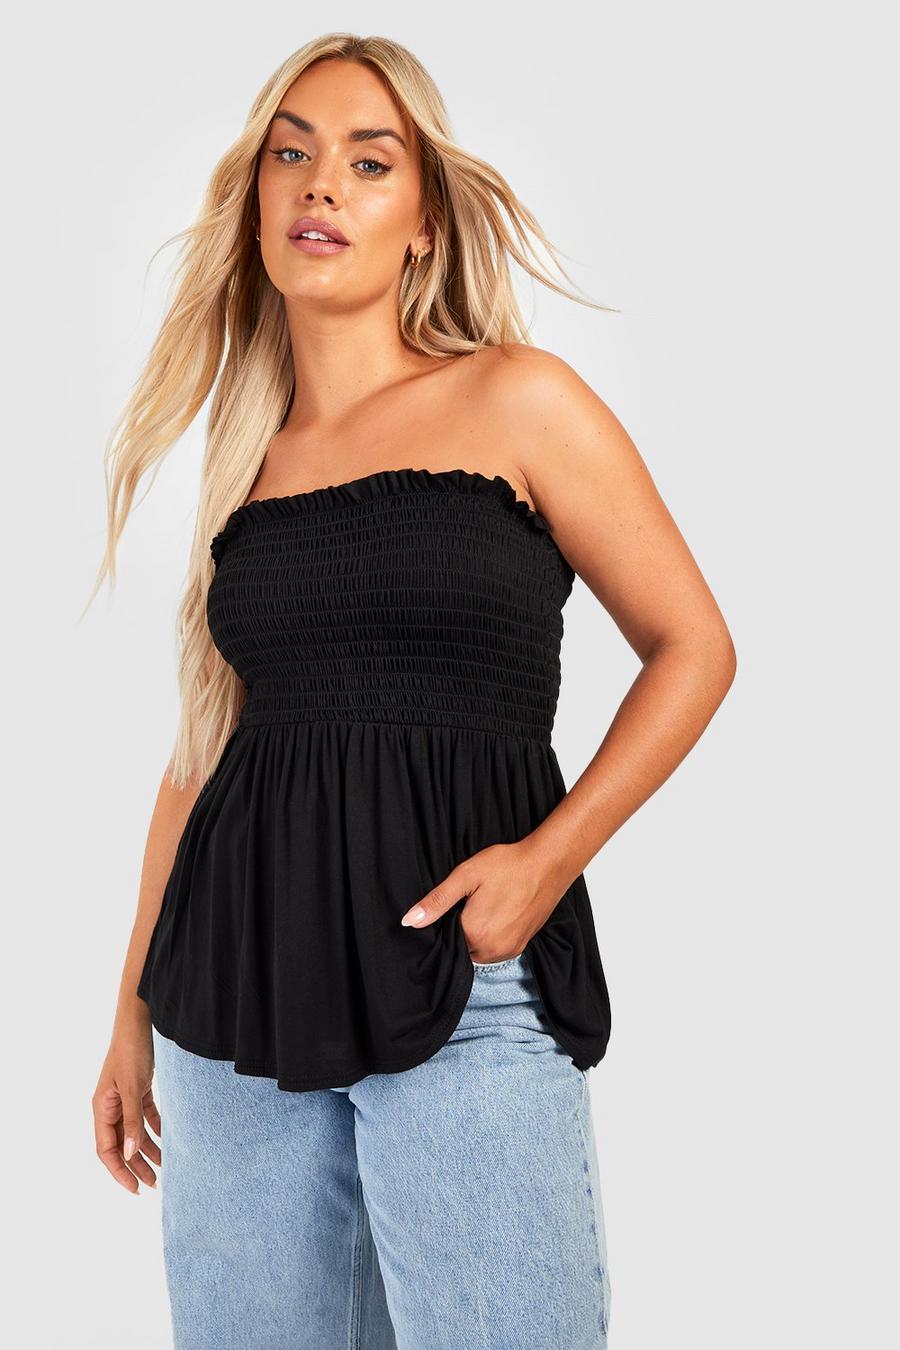 Women Comfort Fit Bandeau Smocked Strapless Babydoll Tube Top Shirt Blouse  Tank Cami -  Canada